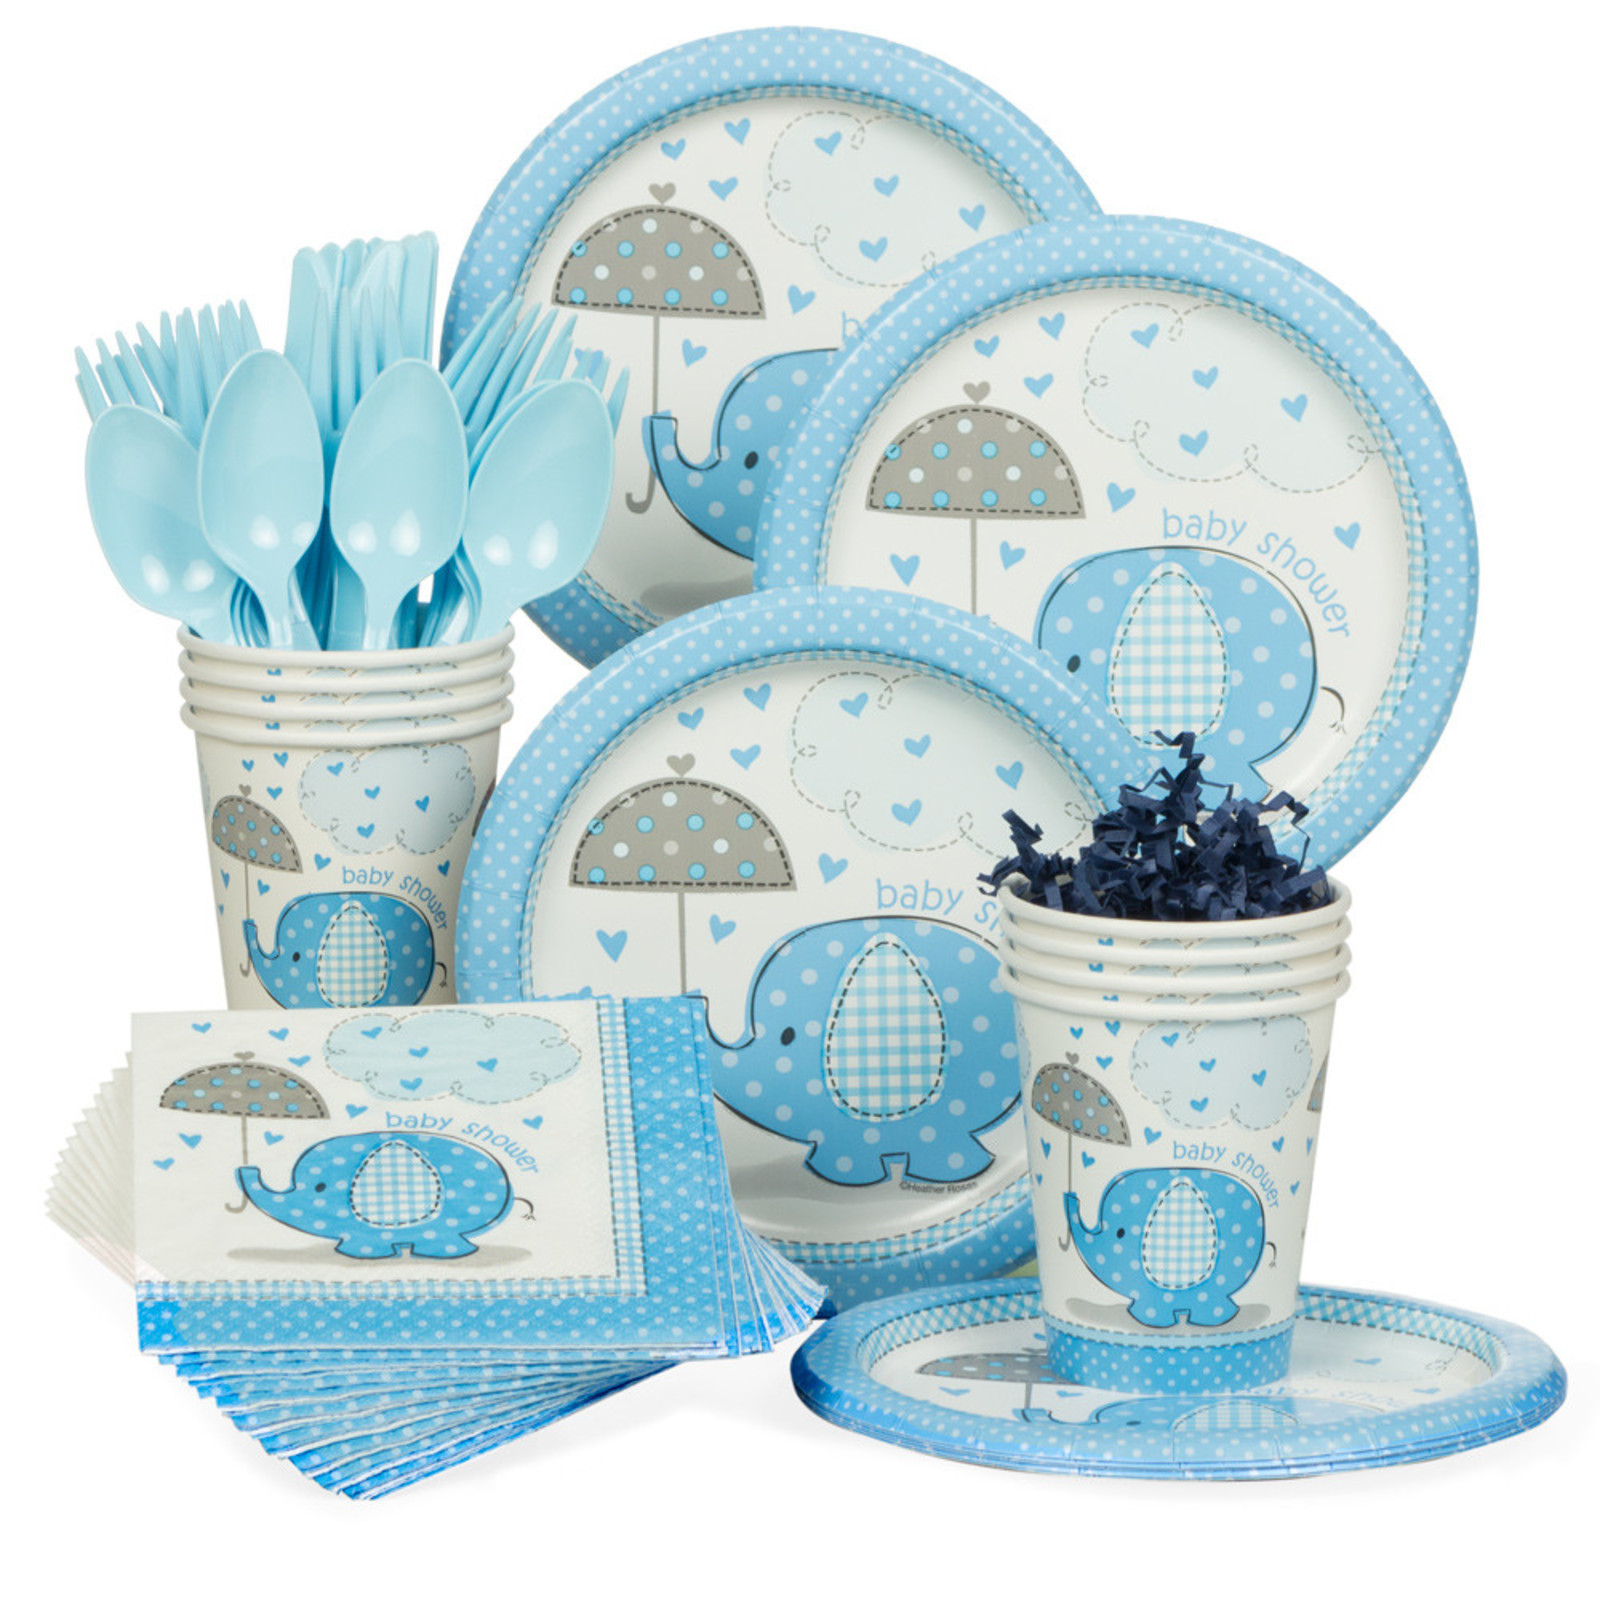 Discount Baby Shower Party Supply
 Umbrellaphants Blue Baby Shower Standard Tableware Kit